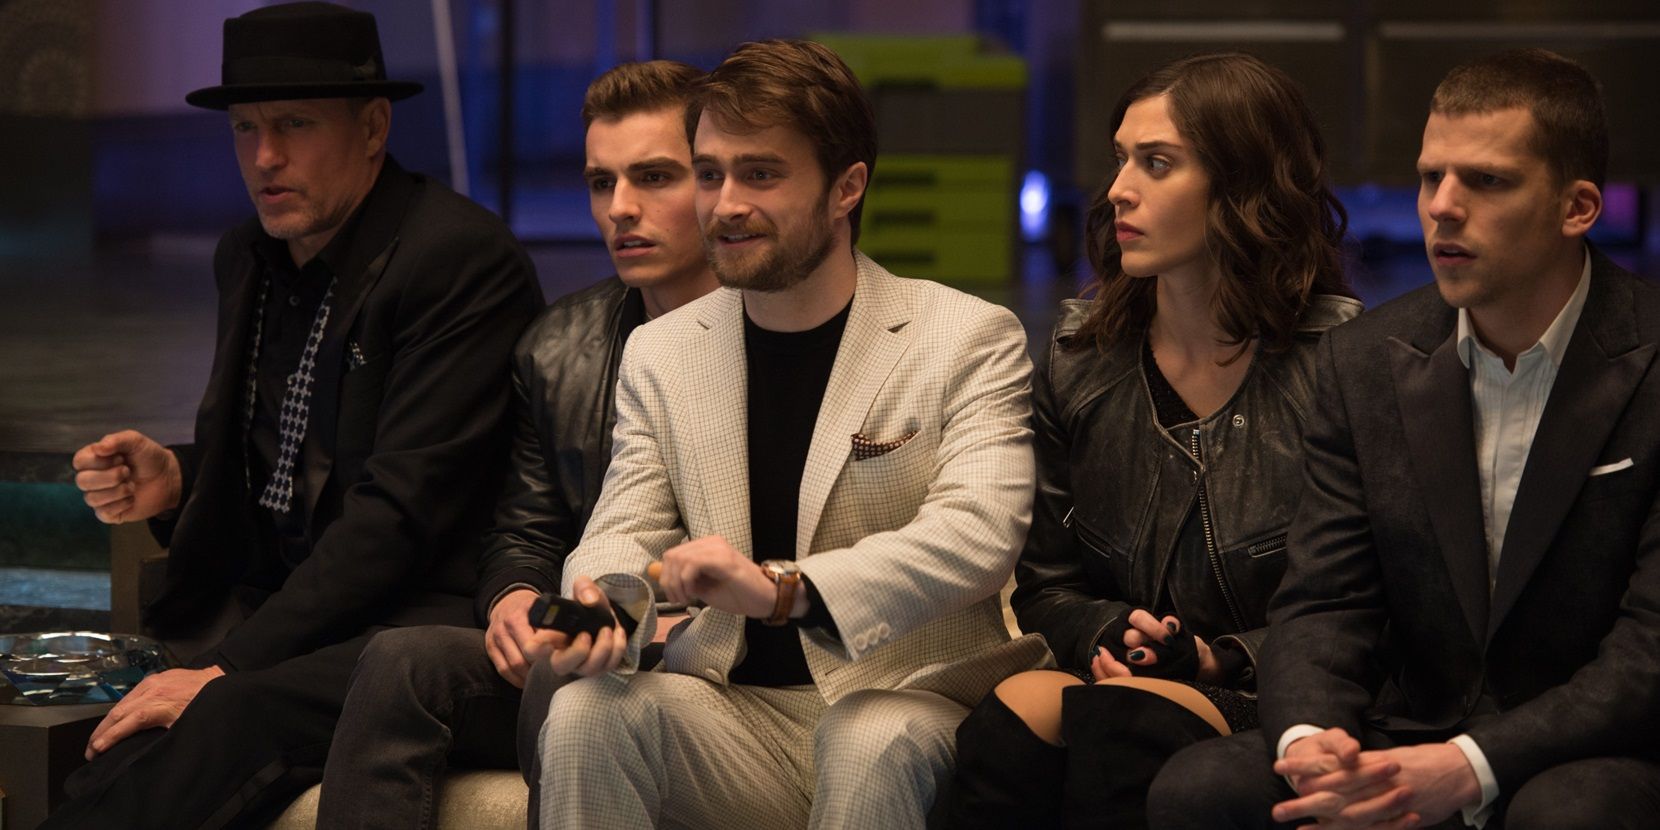 Daniel Radcliffe on a couch with the Four Horsemen in Now You See Me 2